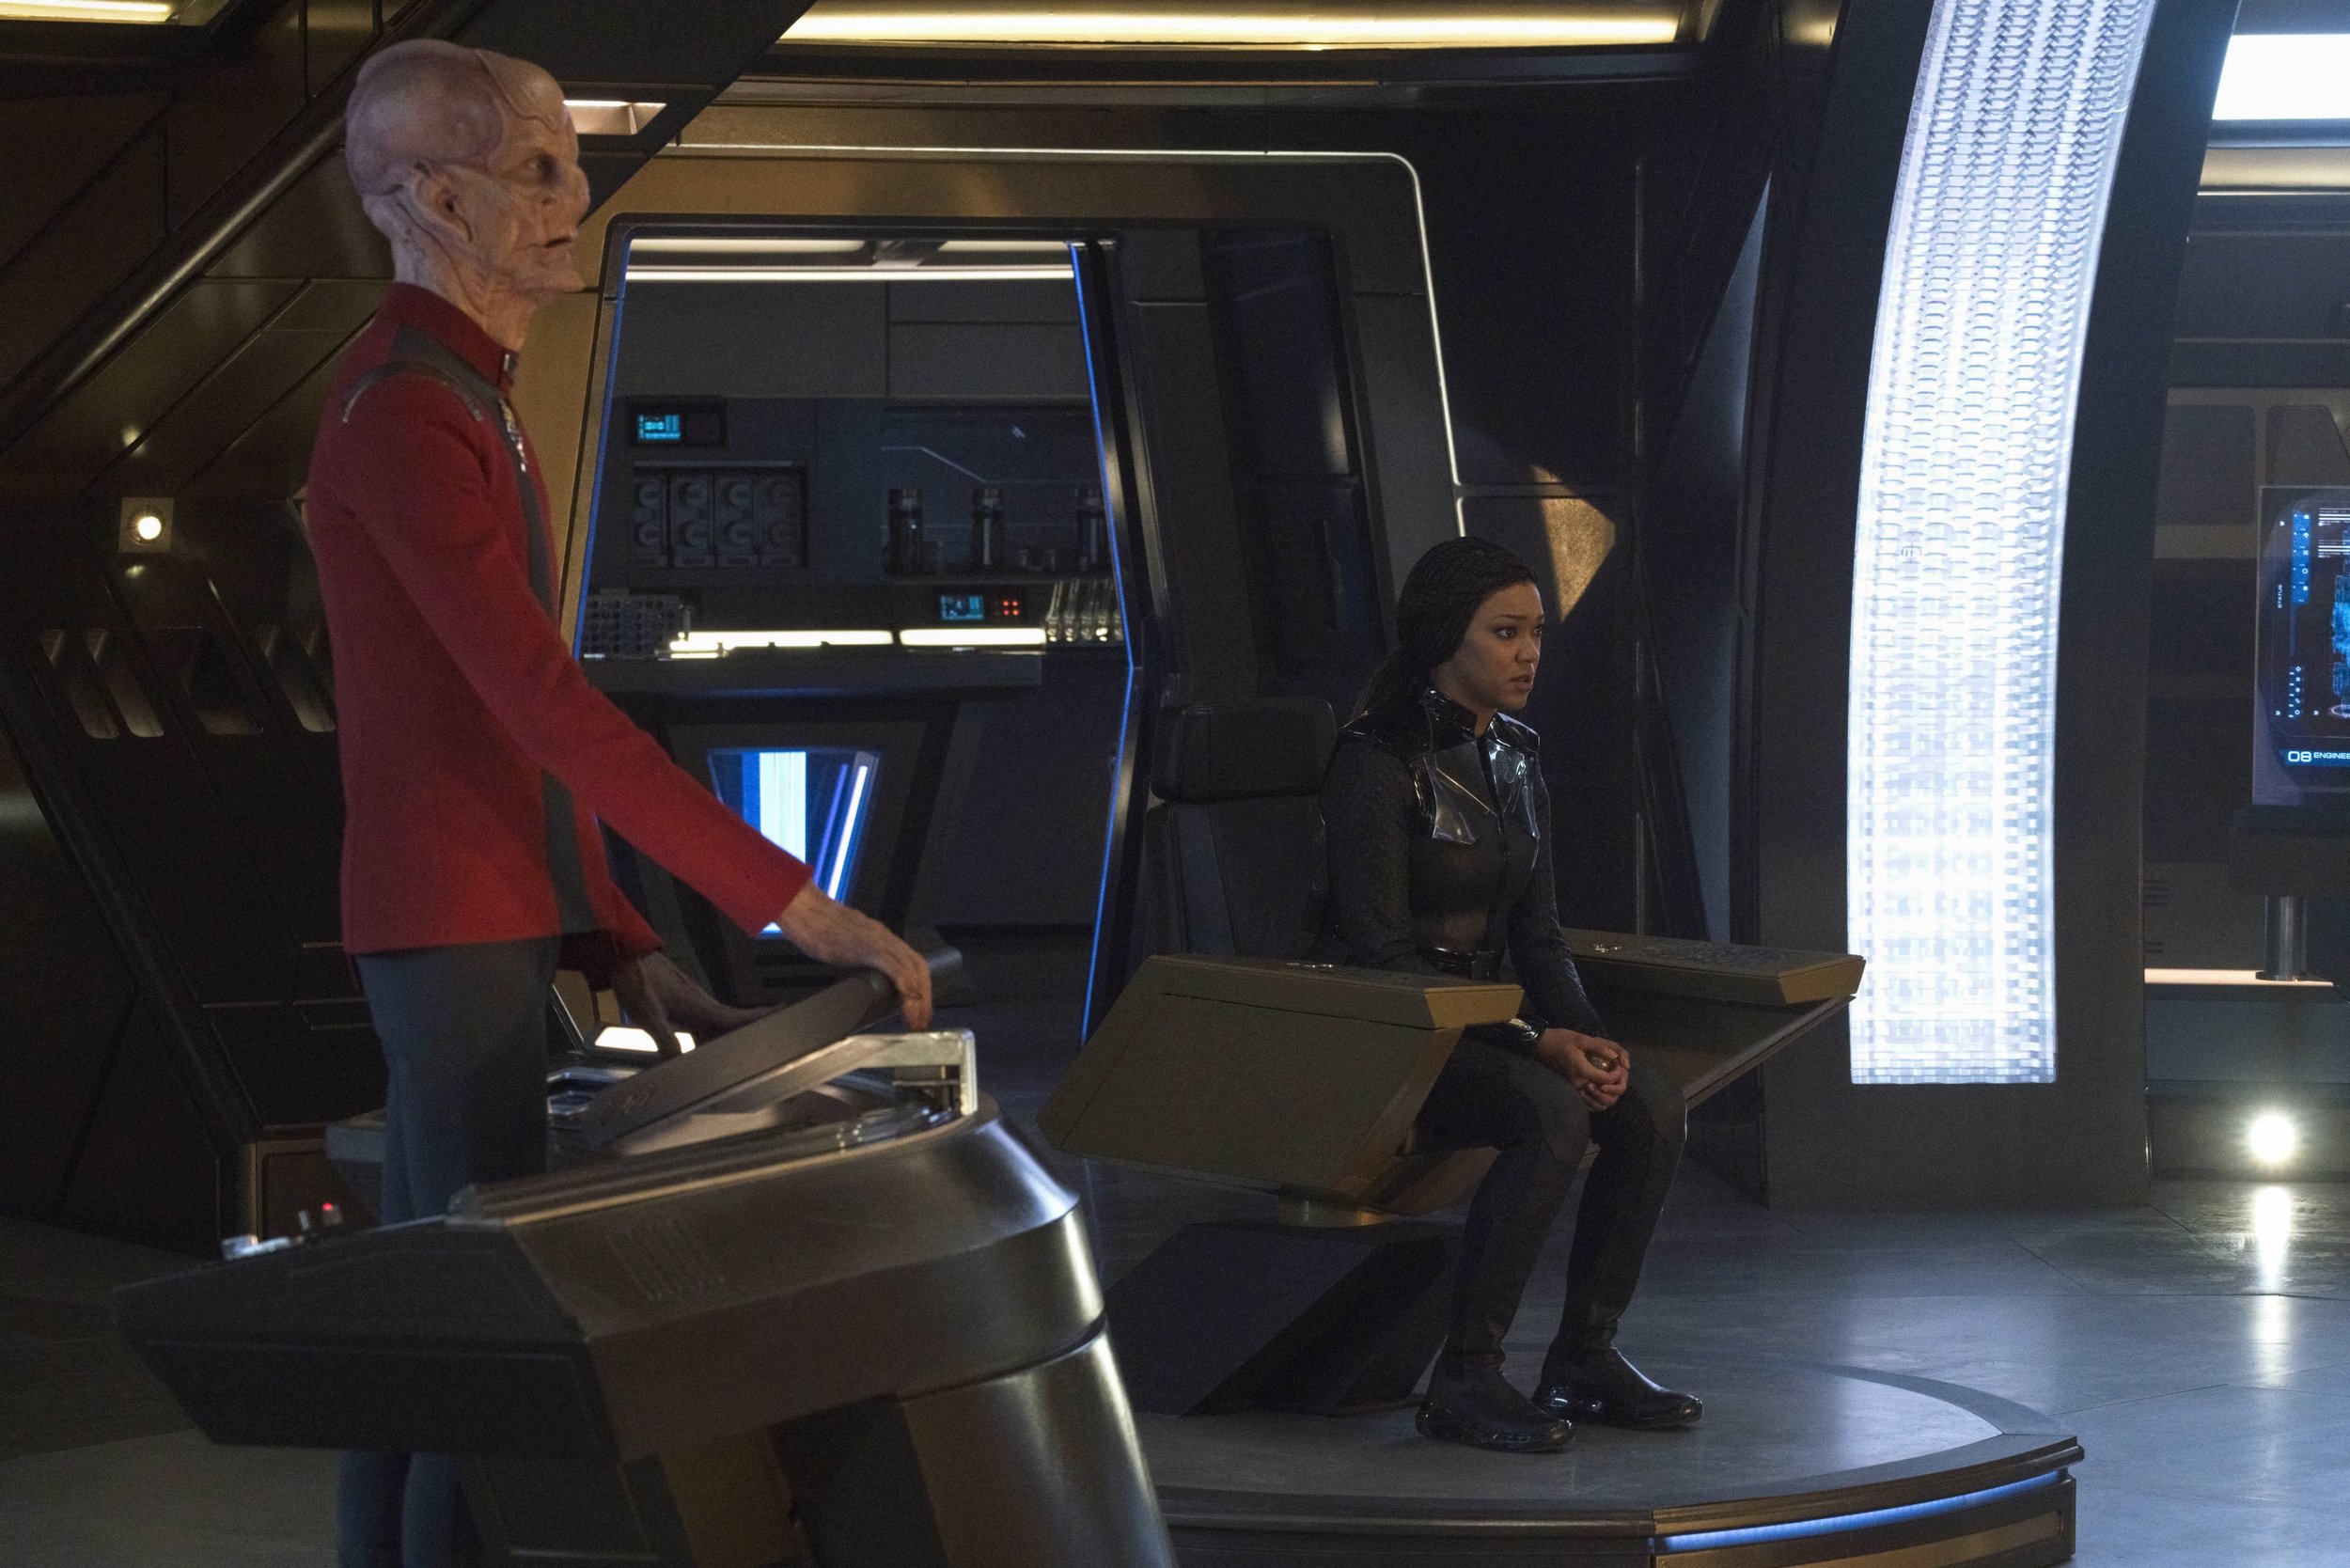   Pictured: Doug Jones as Saru and Sonequa Martin Green a Burnham of the Paramount+ original series STAR TREK: DISCOVERY. Photo Cr: Michael Gibson/Paramount+ (C) 2021 CBS Interactive. All Rights Reserved.  